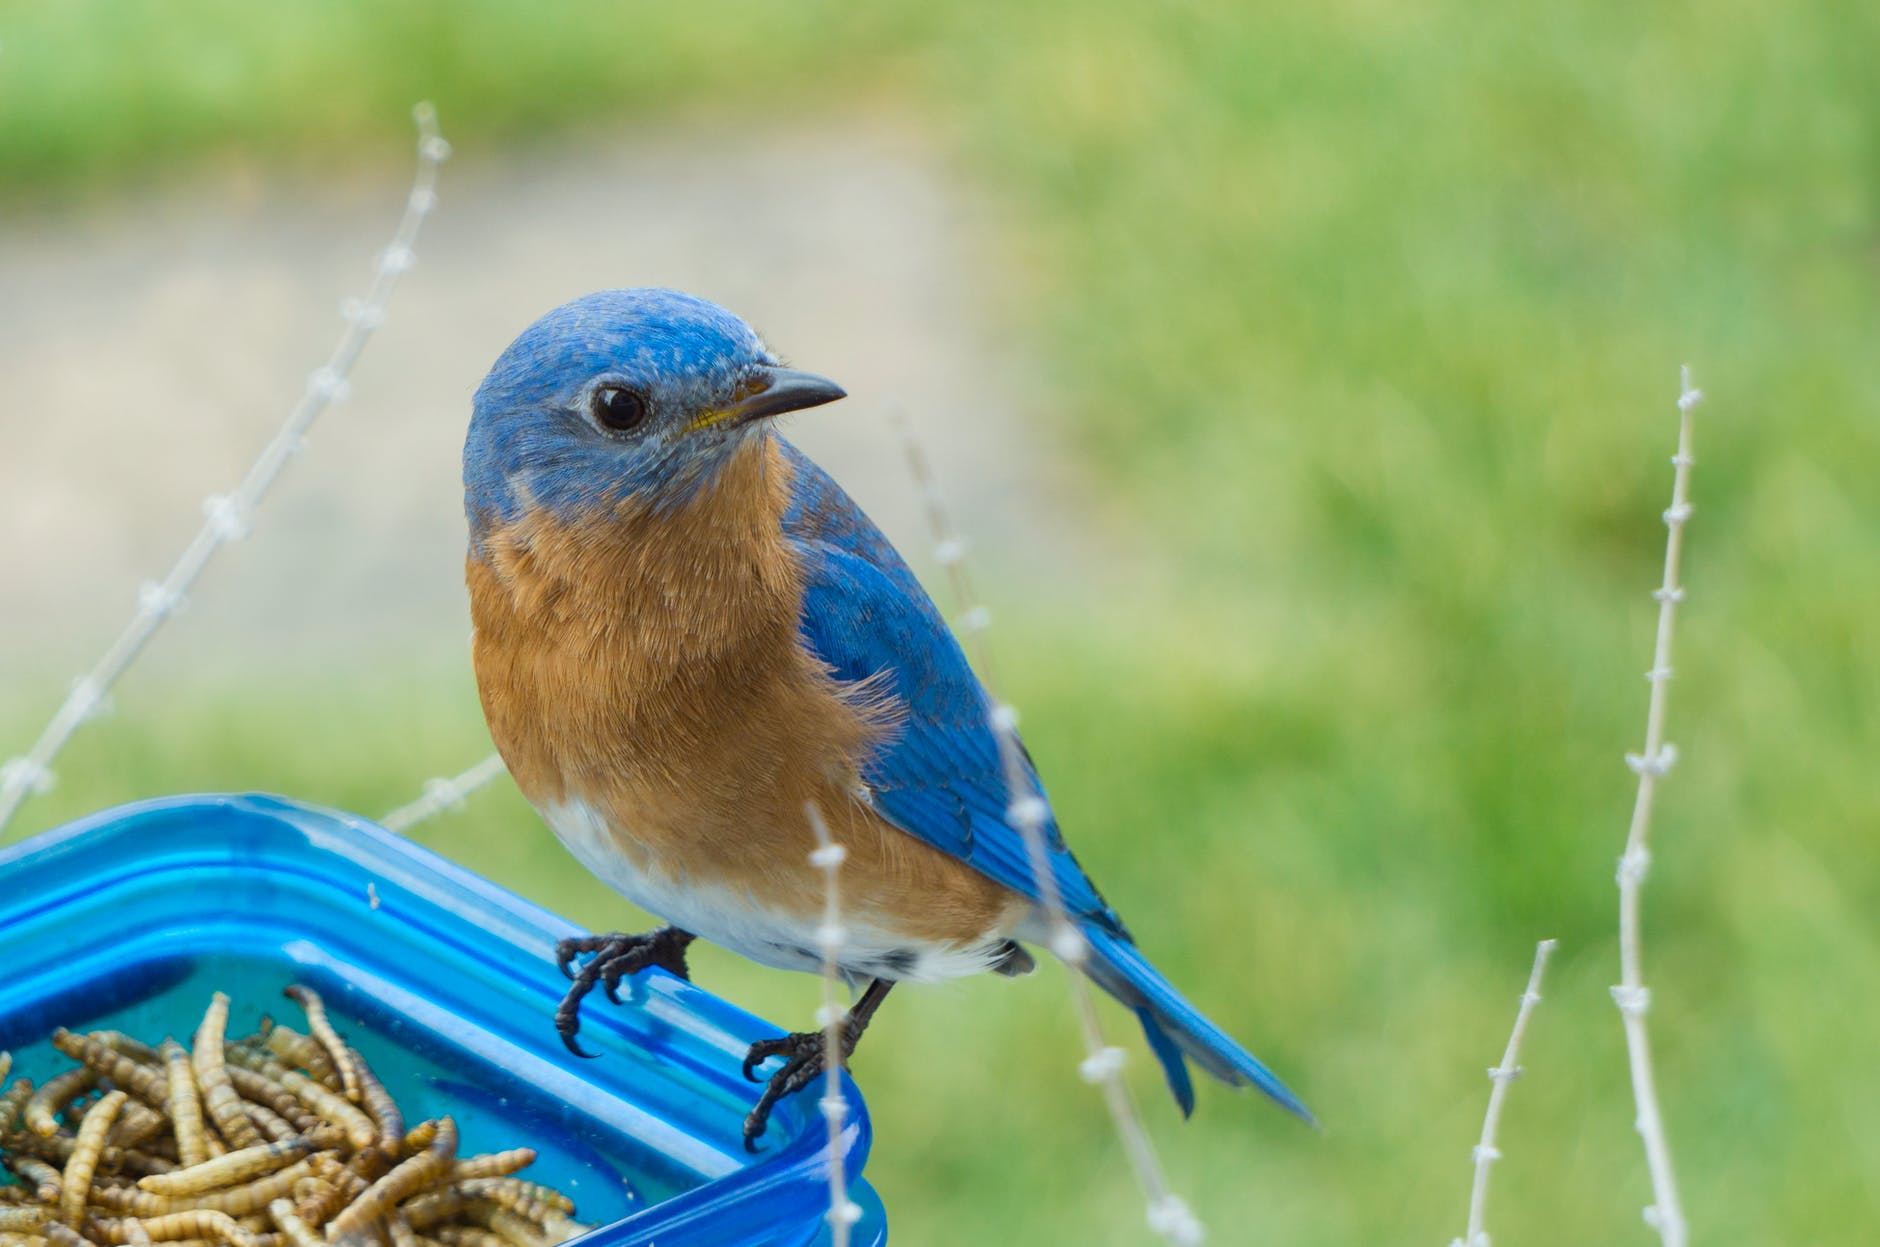 selective focus photography of blue and brown bird on blue glass canister